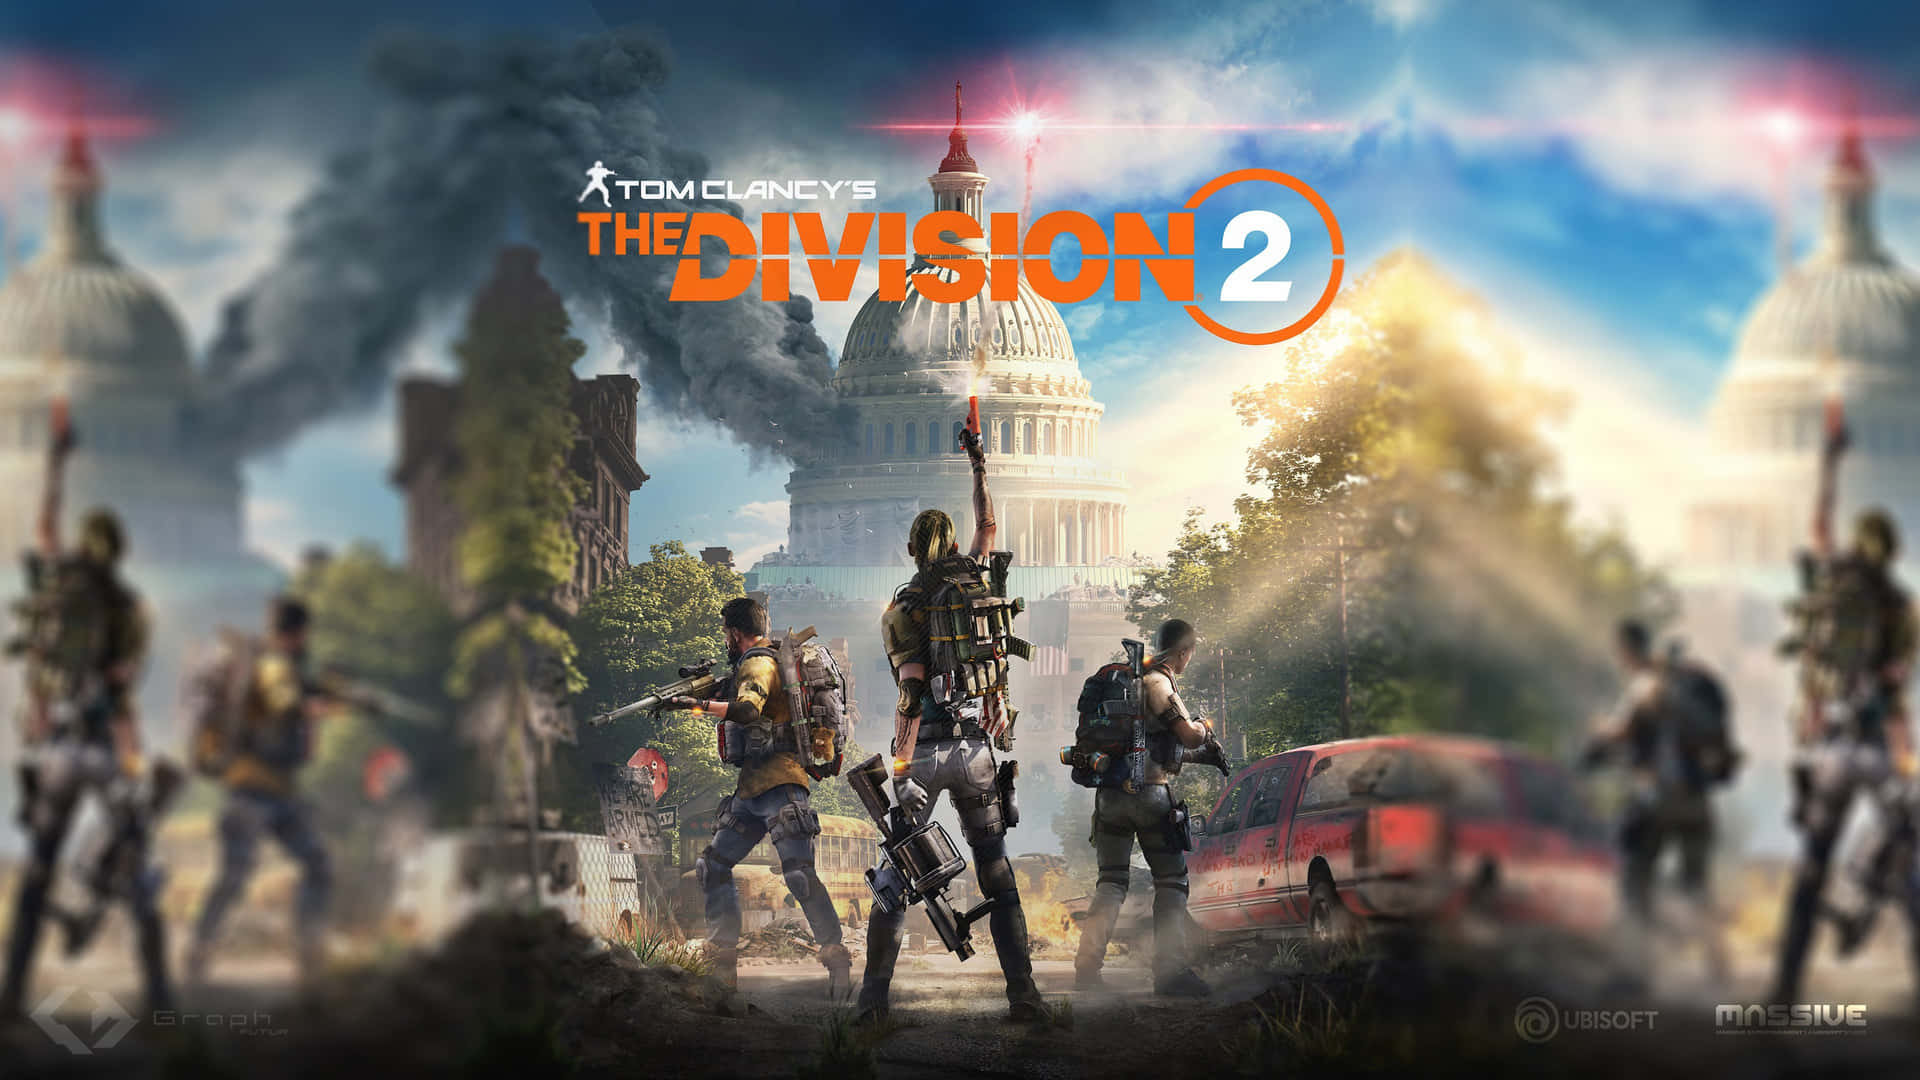 Experience intense combat and exploration in The Division 2 4K Wallpaper